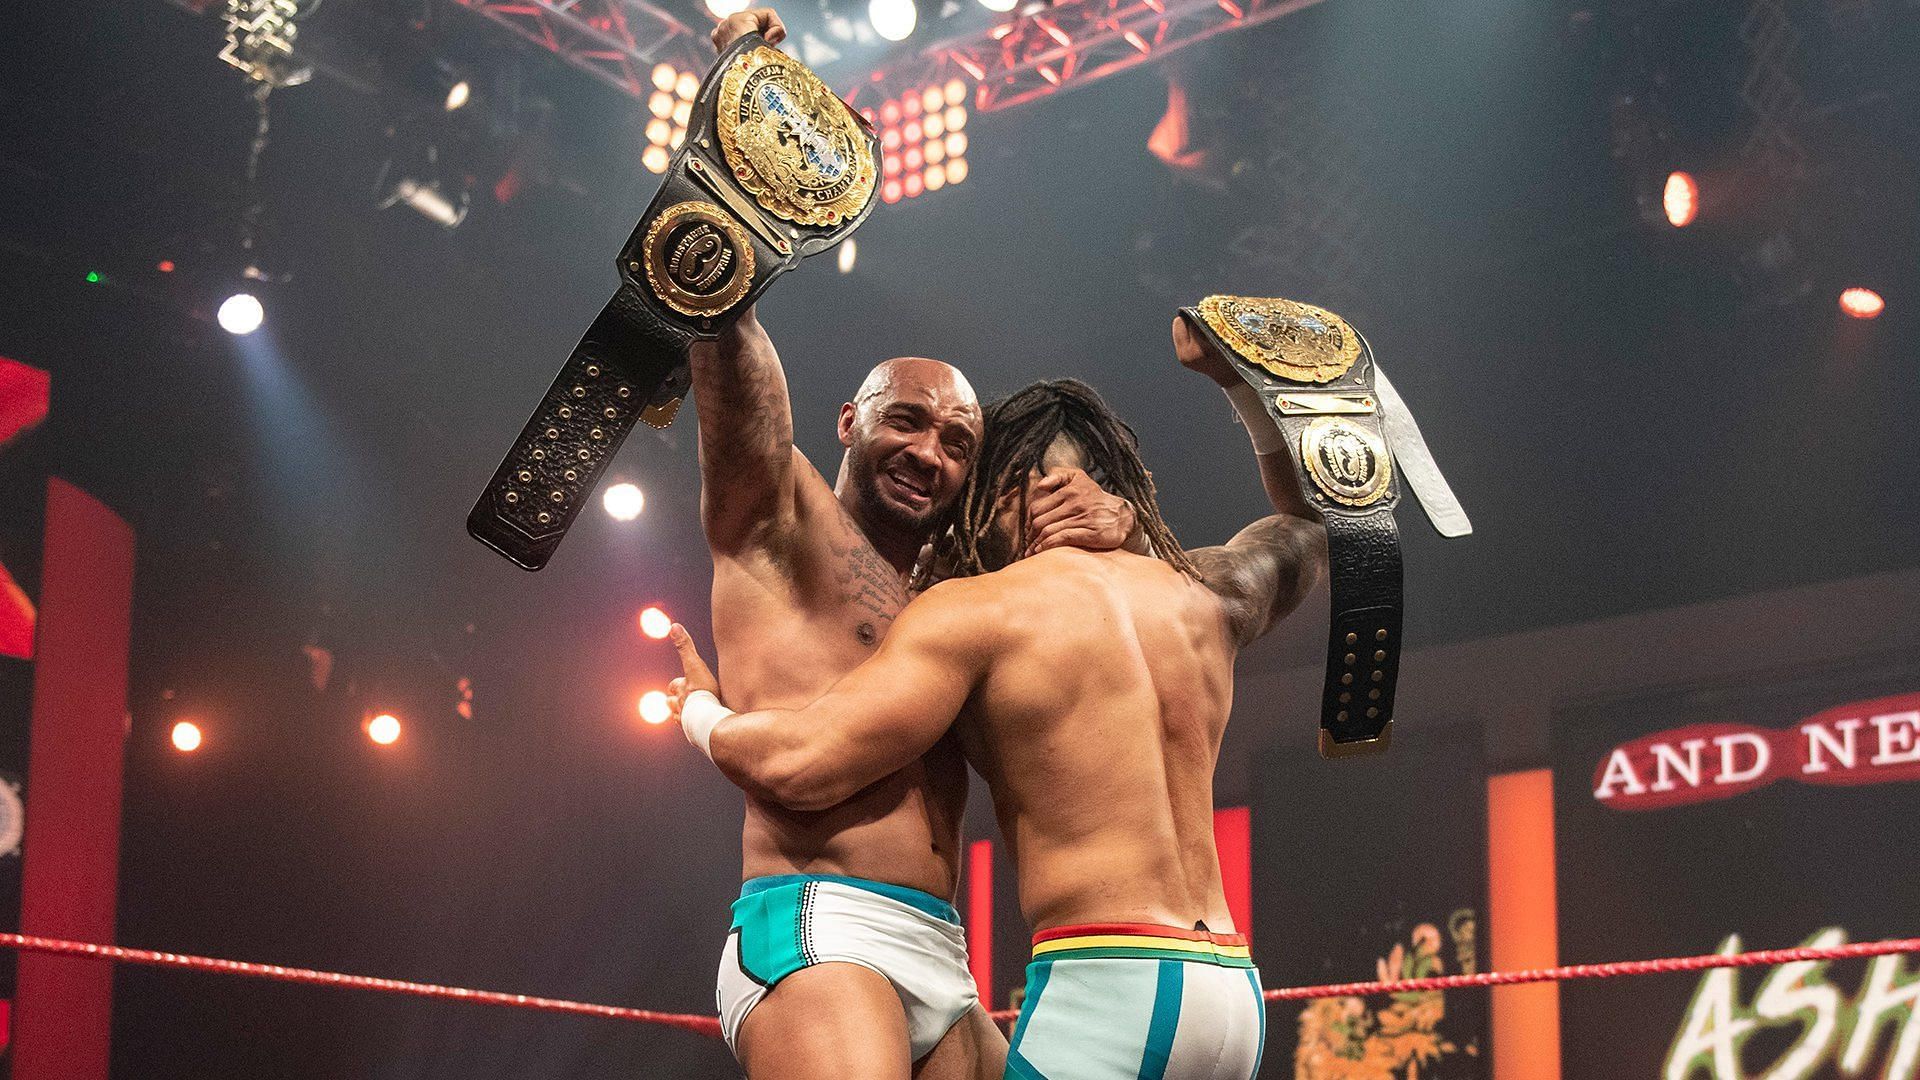 Ashton Smith and Oliver Carter were crowned the new NXT UK Tag Team Champions